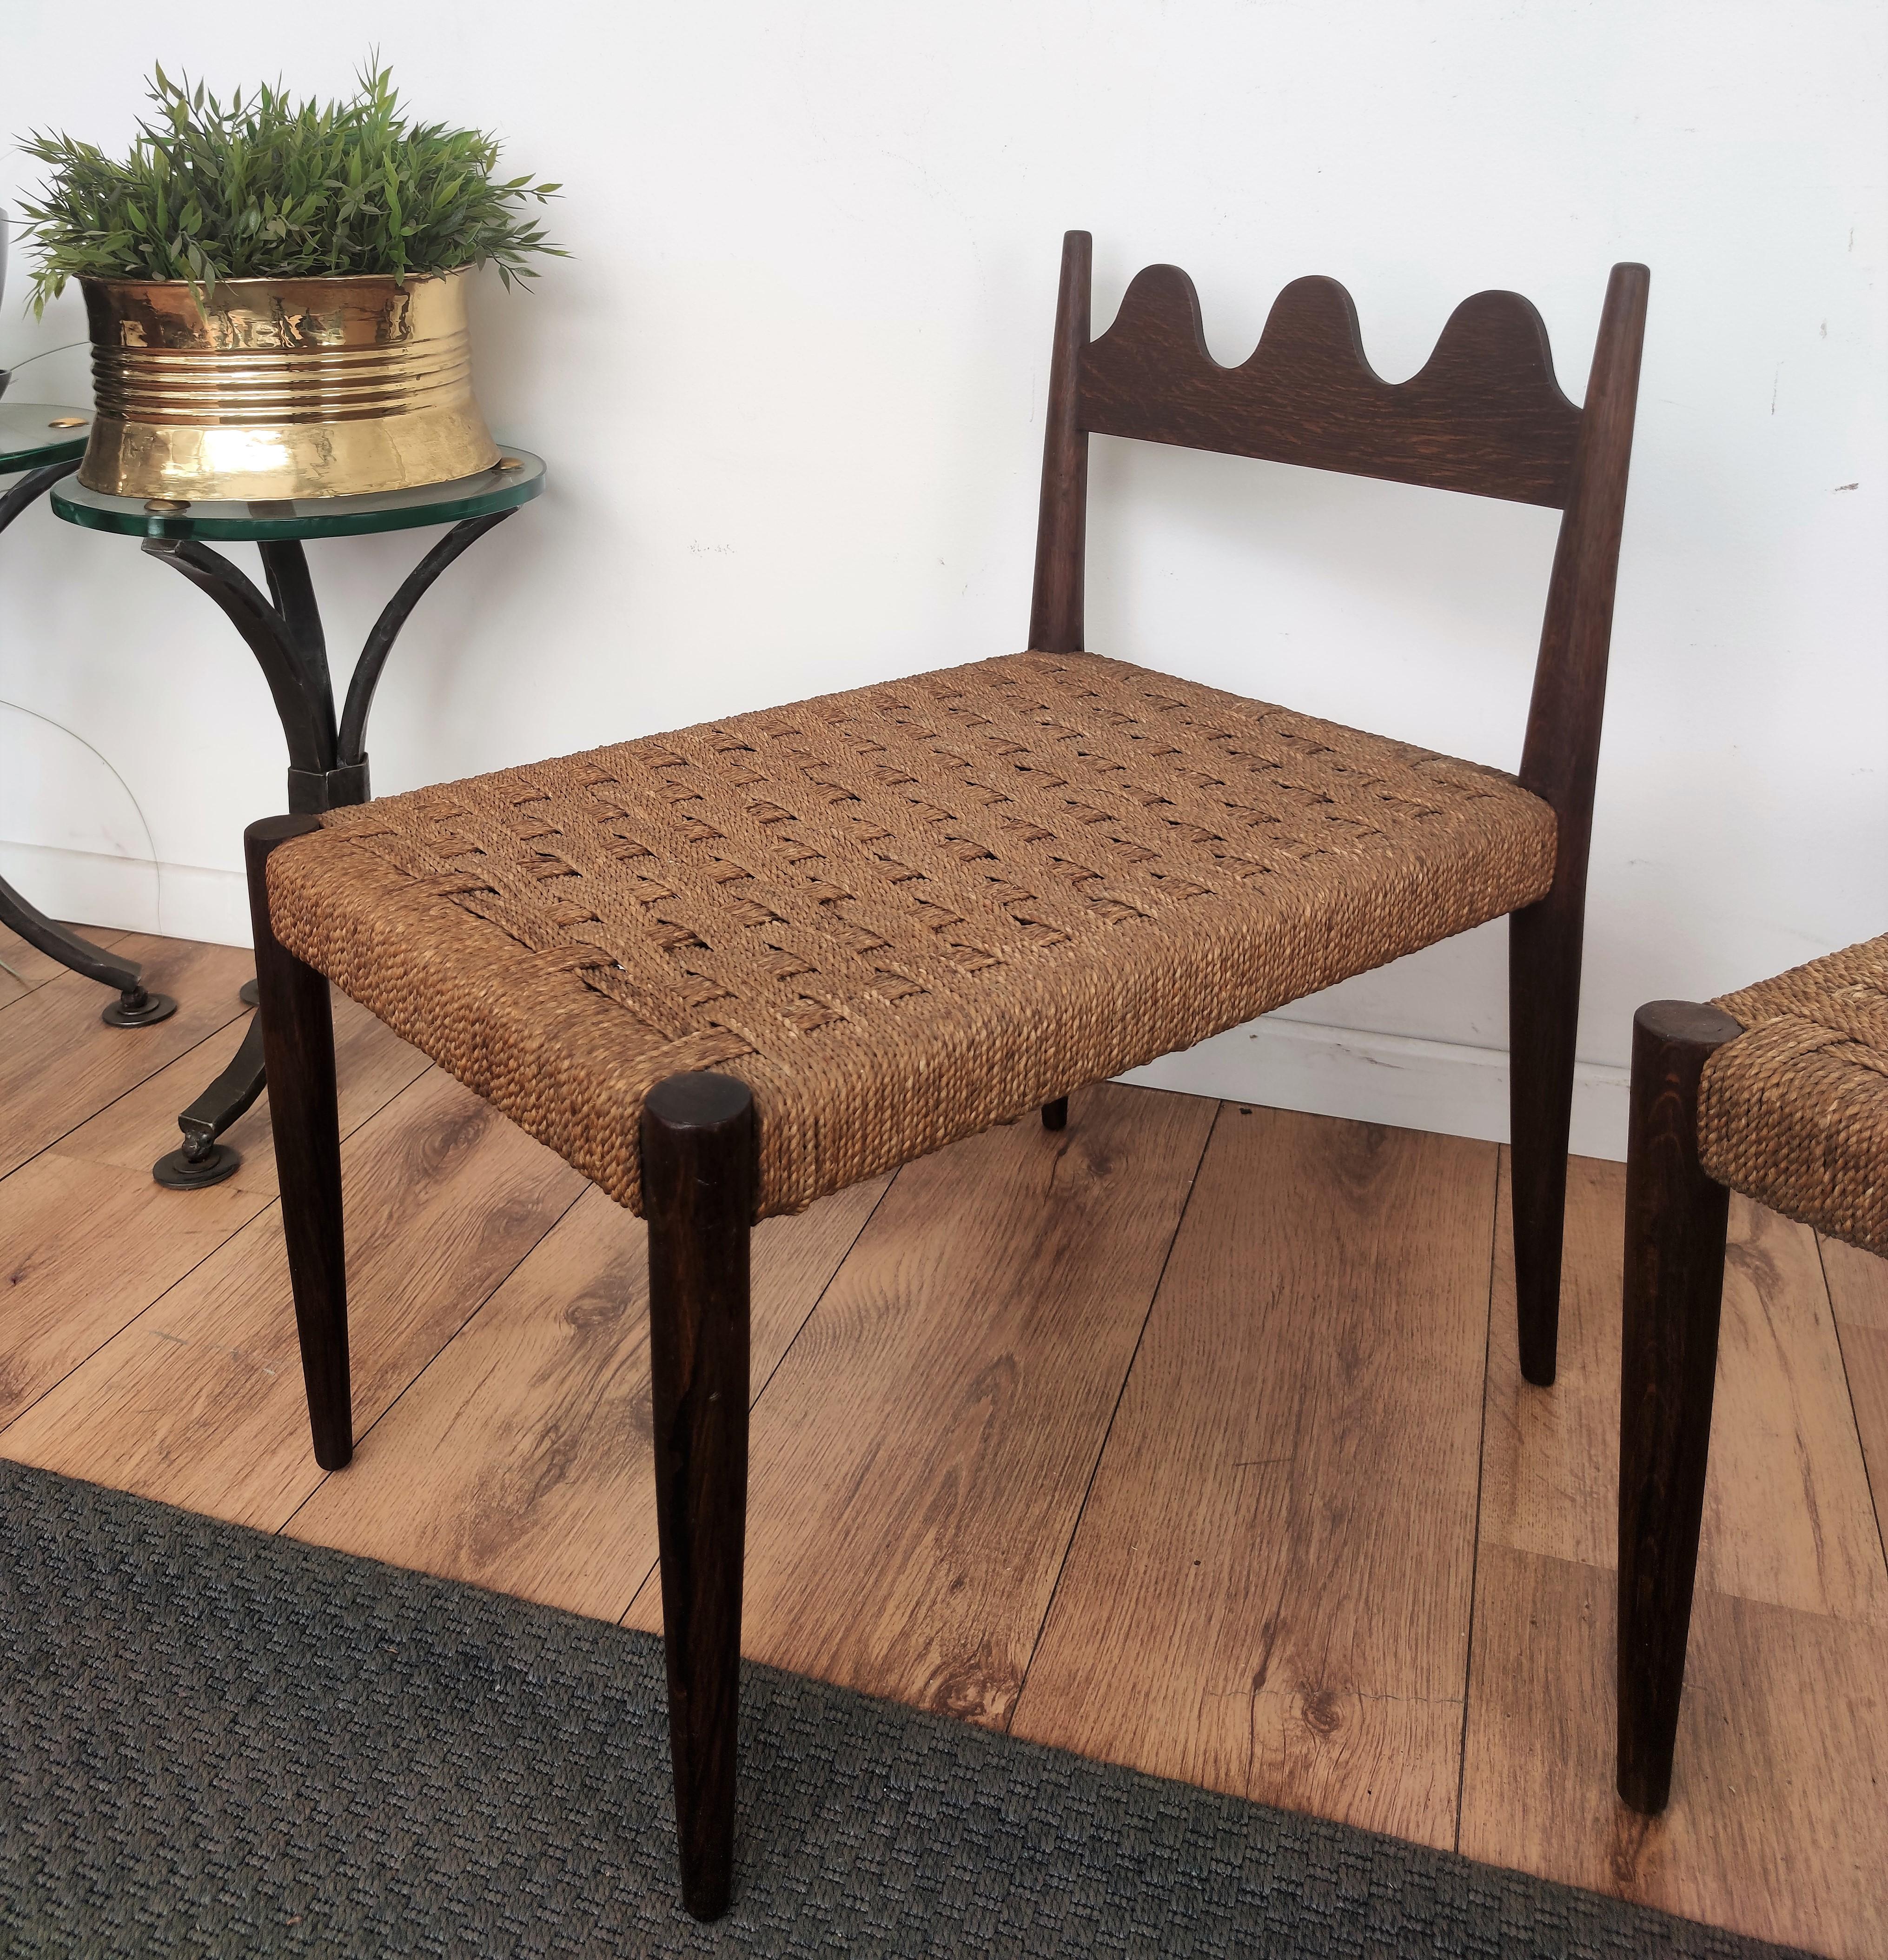 20th Century Pair of 1960s Italian Midcentury Carved Wood and Cord Woven Rope Chairs Stools